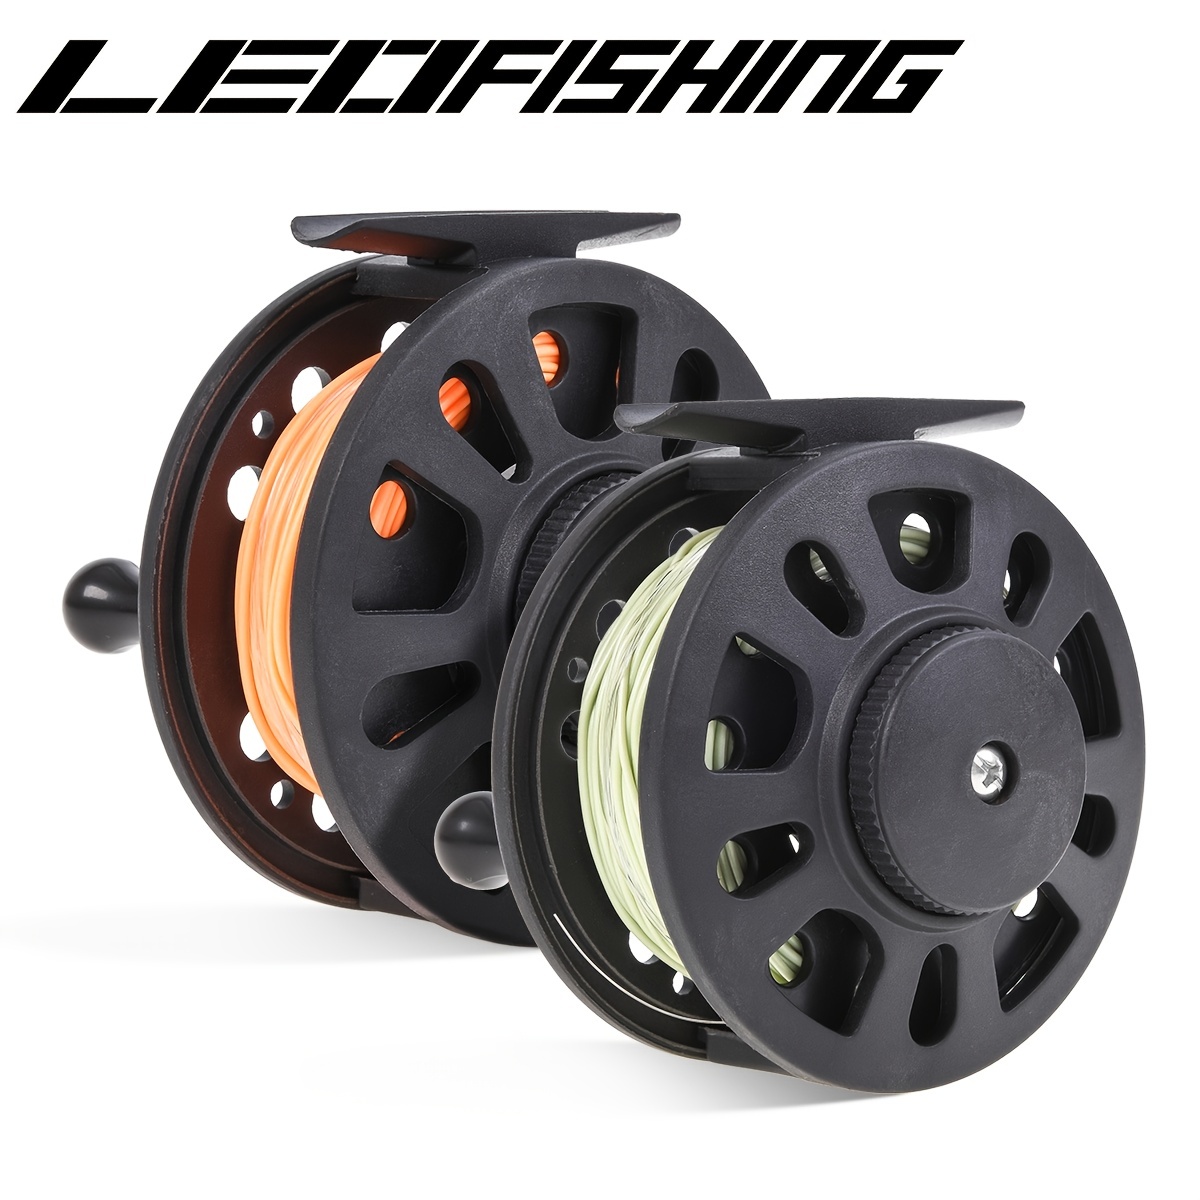 LEOFISHING * Fly Fishing Reel and Line Combo Set - Ideal for River and  Stream Fishing, Outdoor Fishing Accessories - Includes Weight Forward F